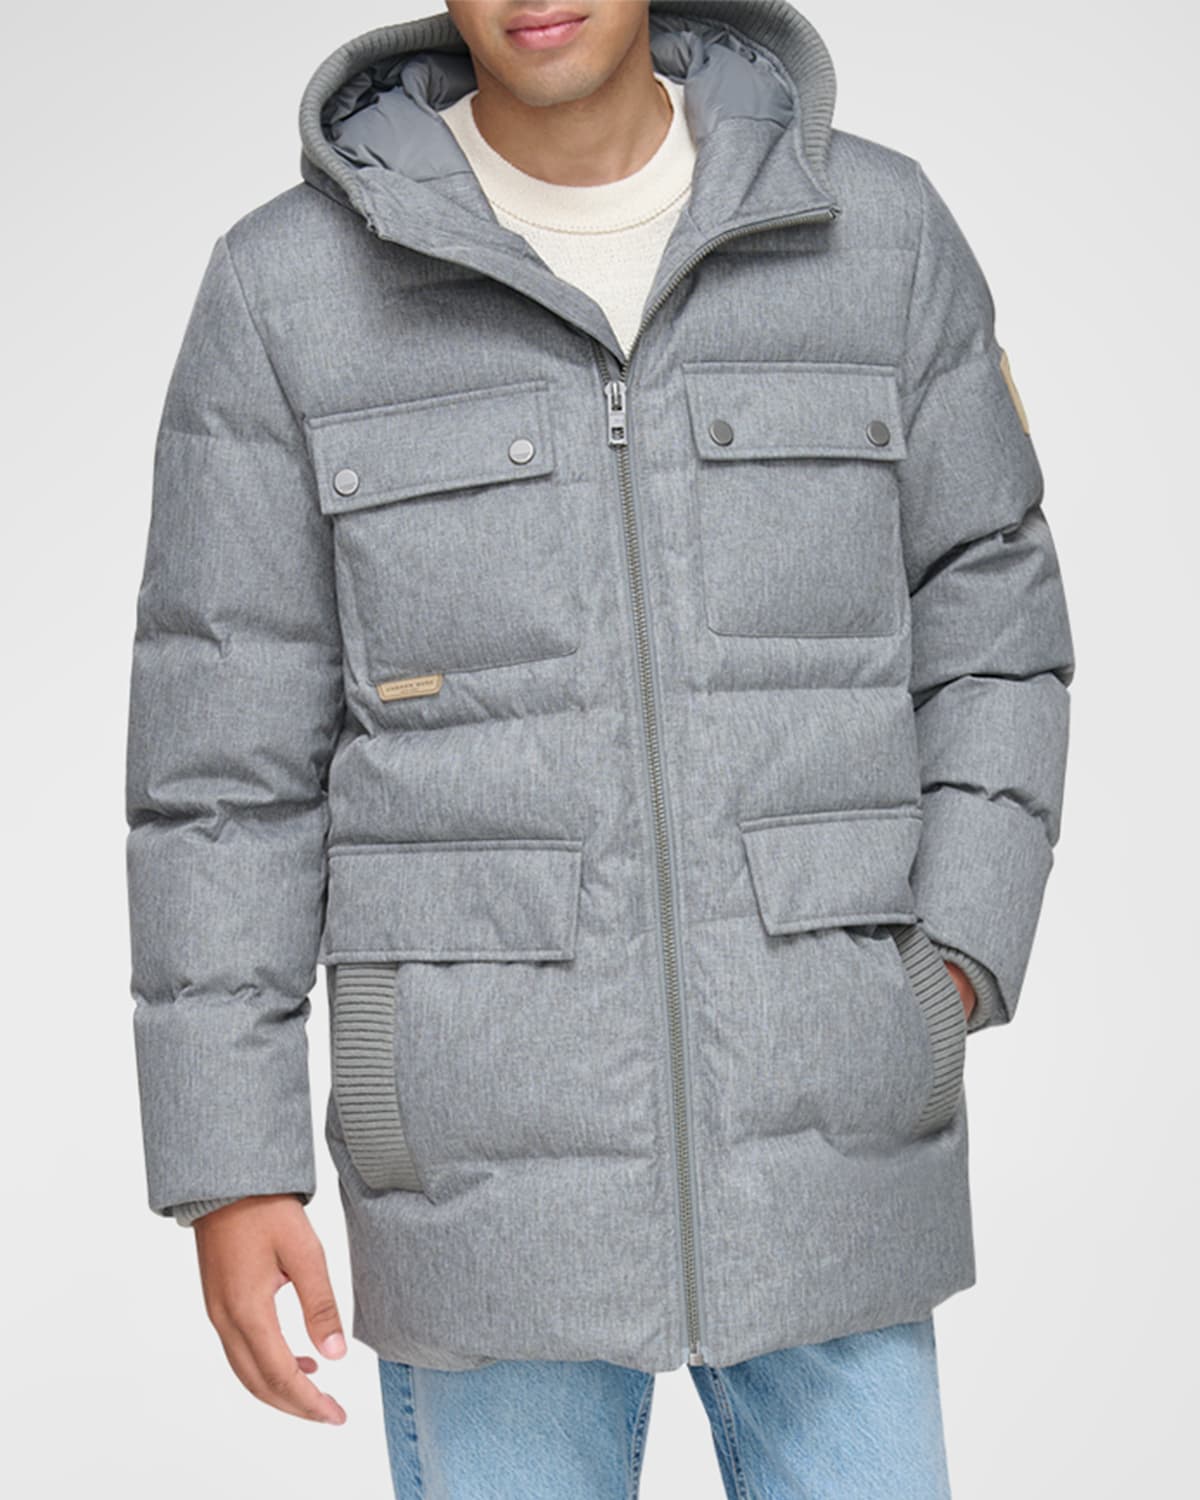 ANDREW MARC MEN'S AMSTEG QUILTED DOWN JACKET